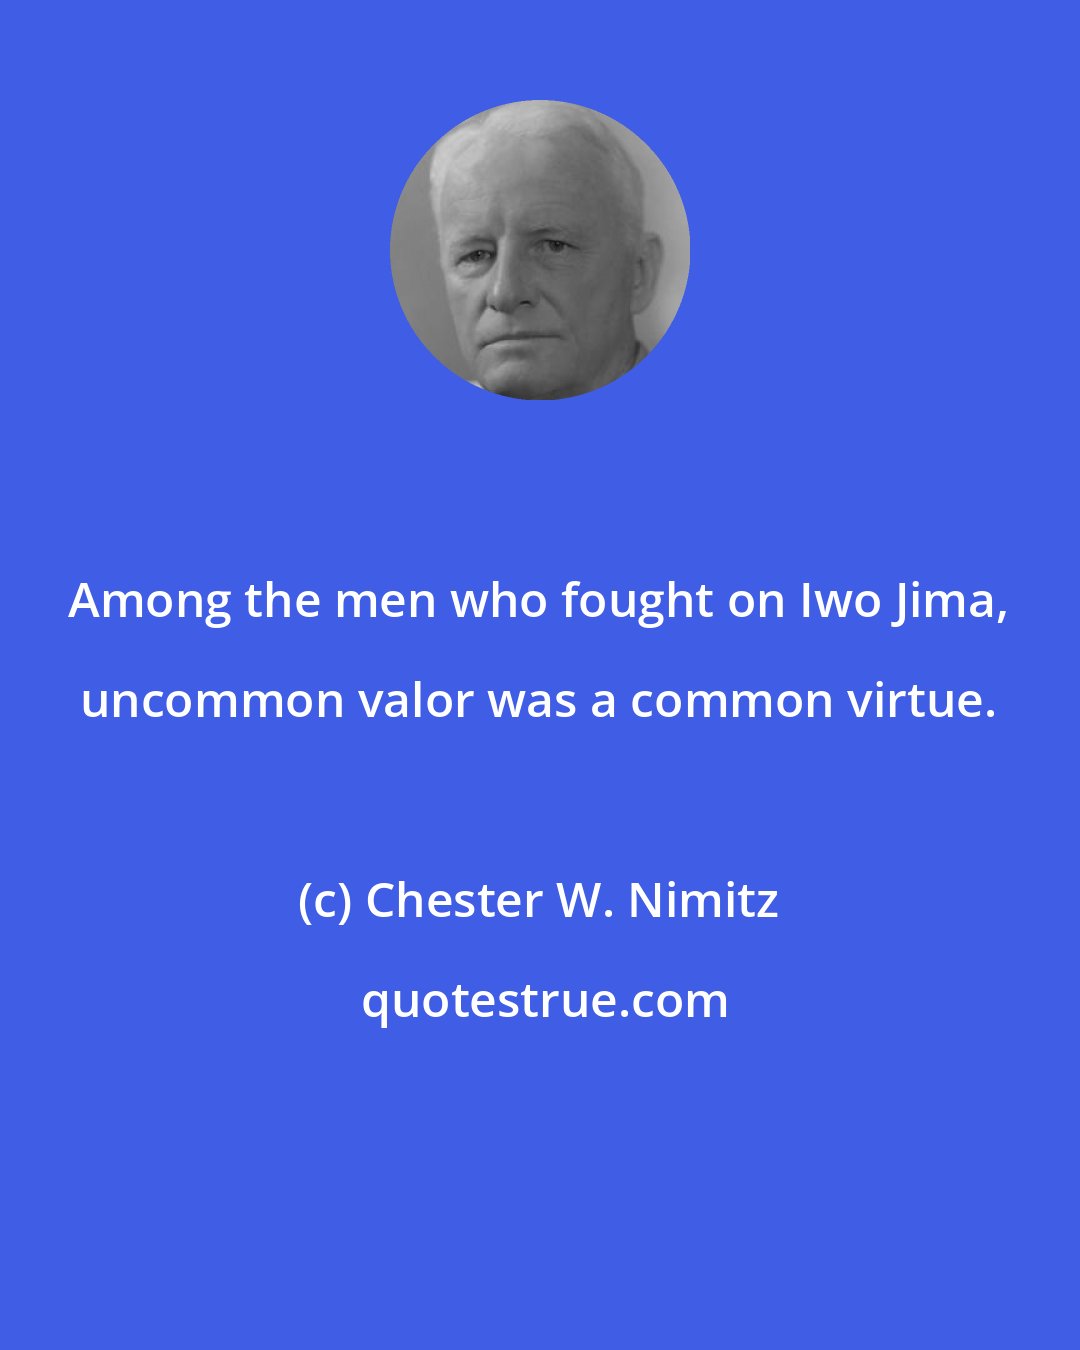 Chester W. Nimitz: Among the men who fought on Iwo Jima, uncommon valor was a common virtue.